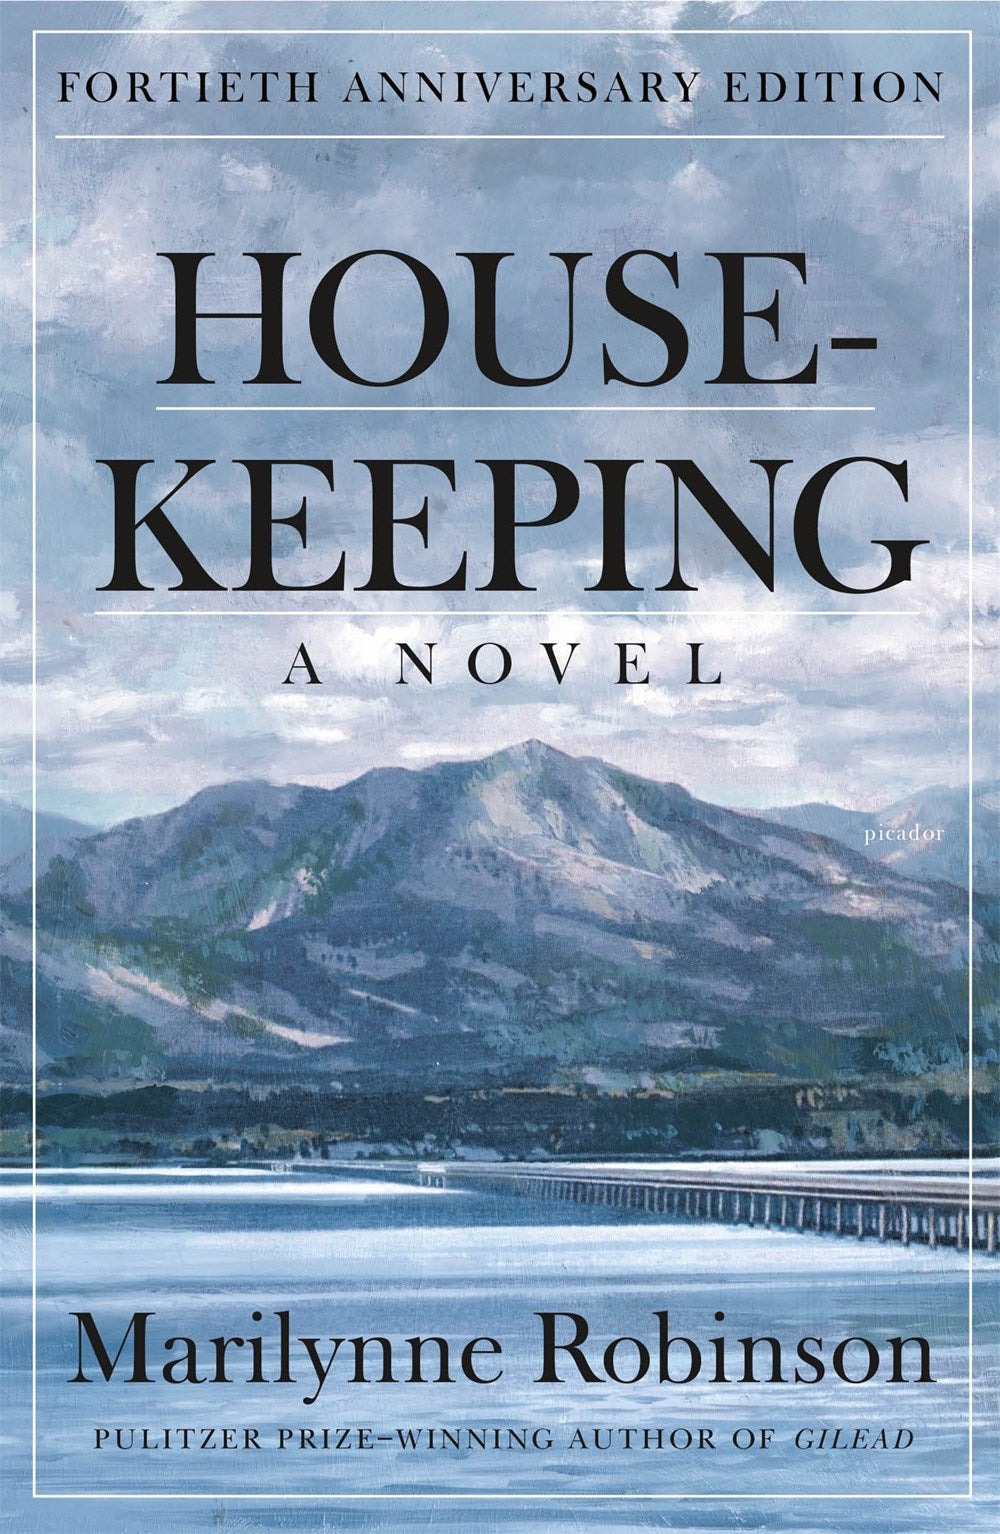 Housekeeping by Marilynne Robinson (40th Anniversary Edition)